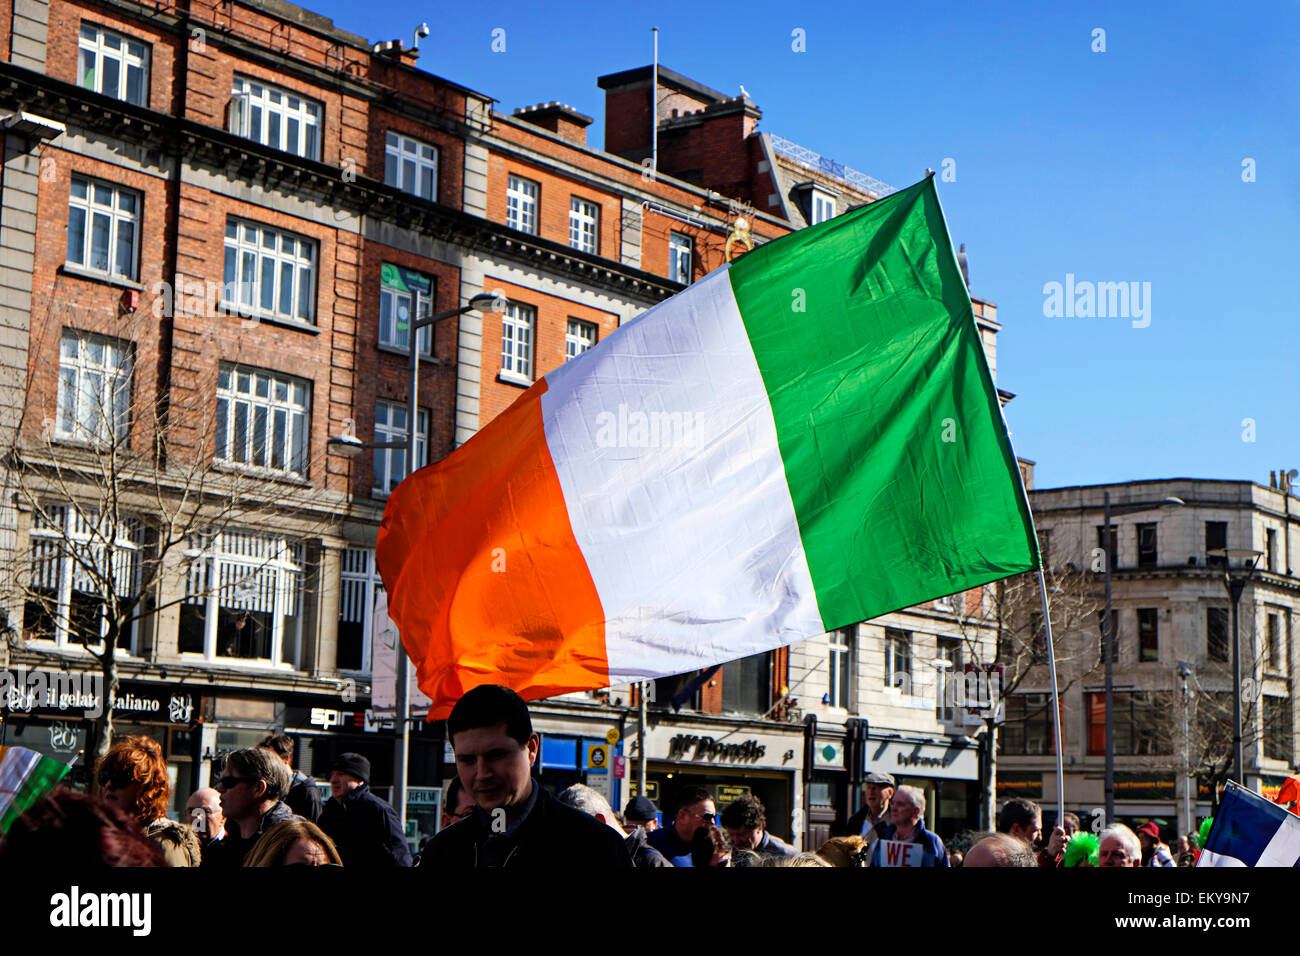 The Republican Irish Flag waves over O'Connell Street during an anti-water taxes demonstration in Dublin city Ireland.in 2014 Stock Photo